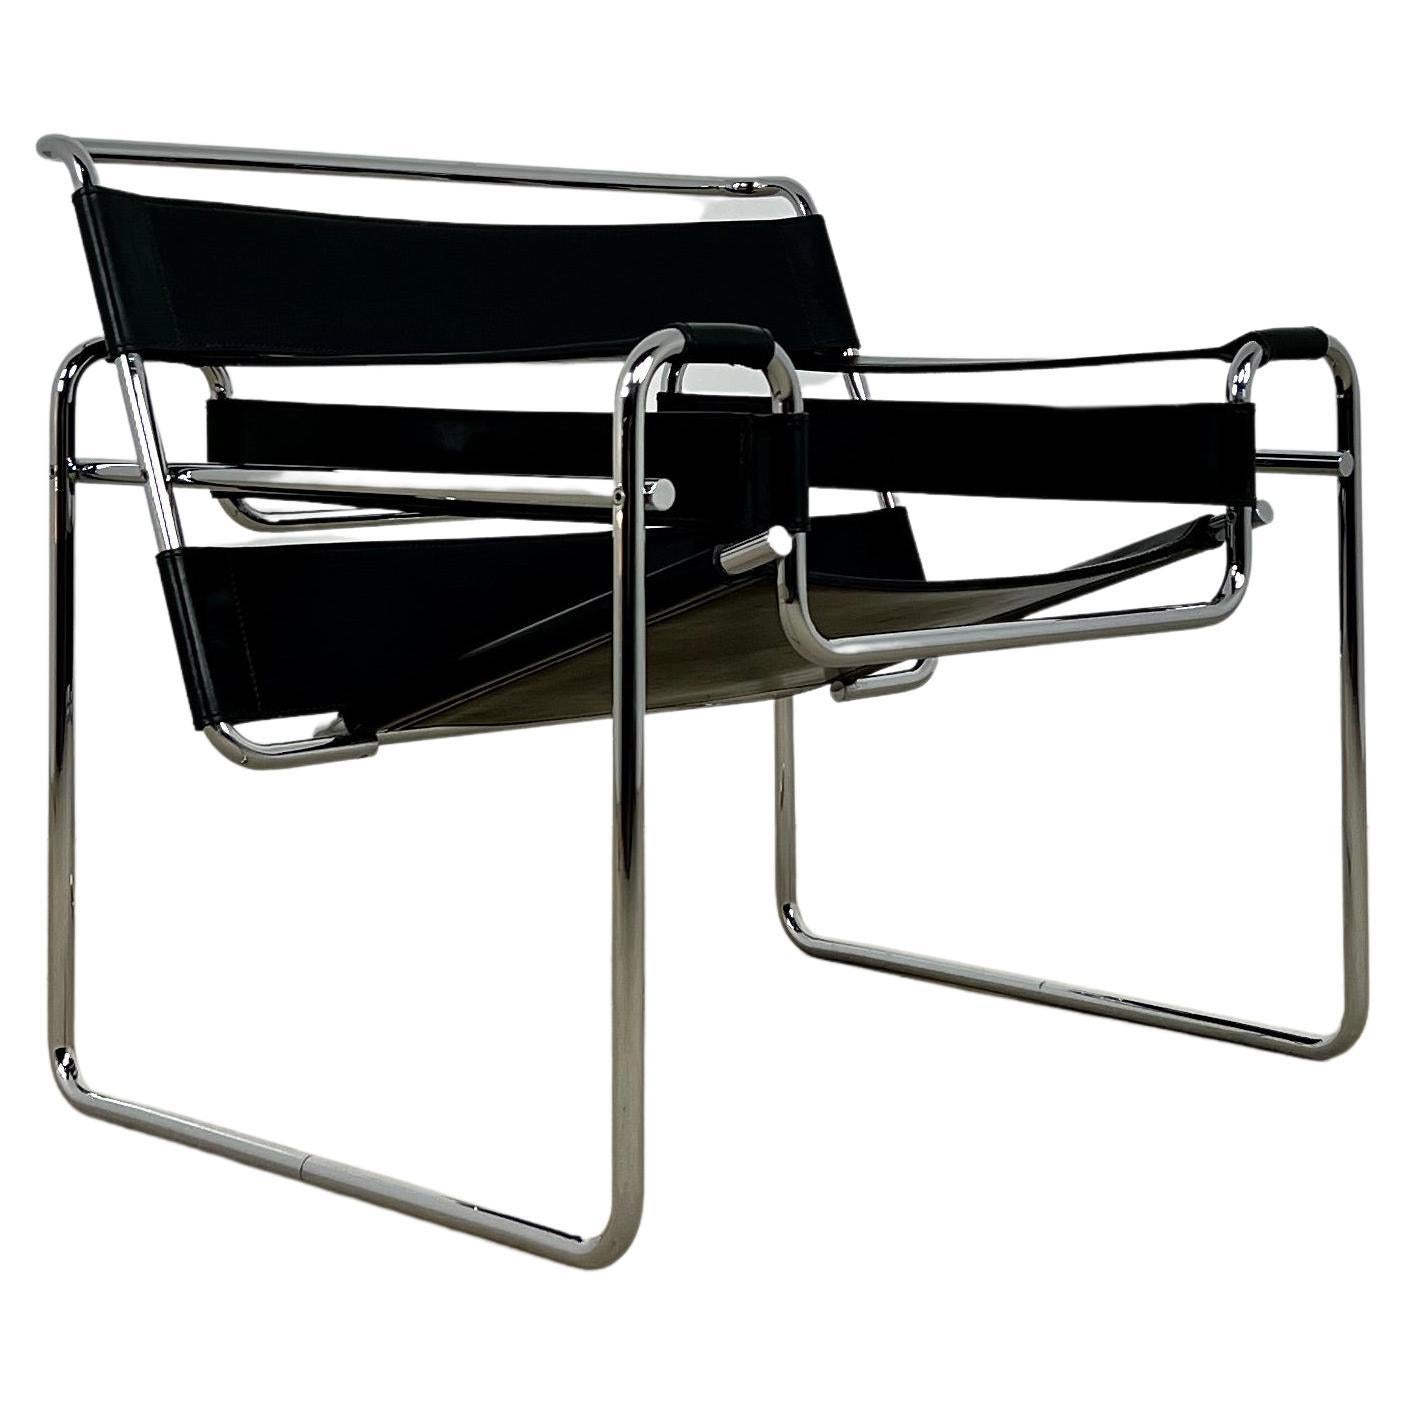 Wassily Armchair by Marcel Breuer for Gavina, 1972